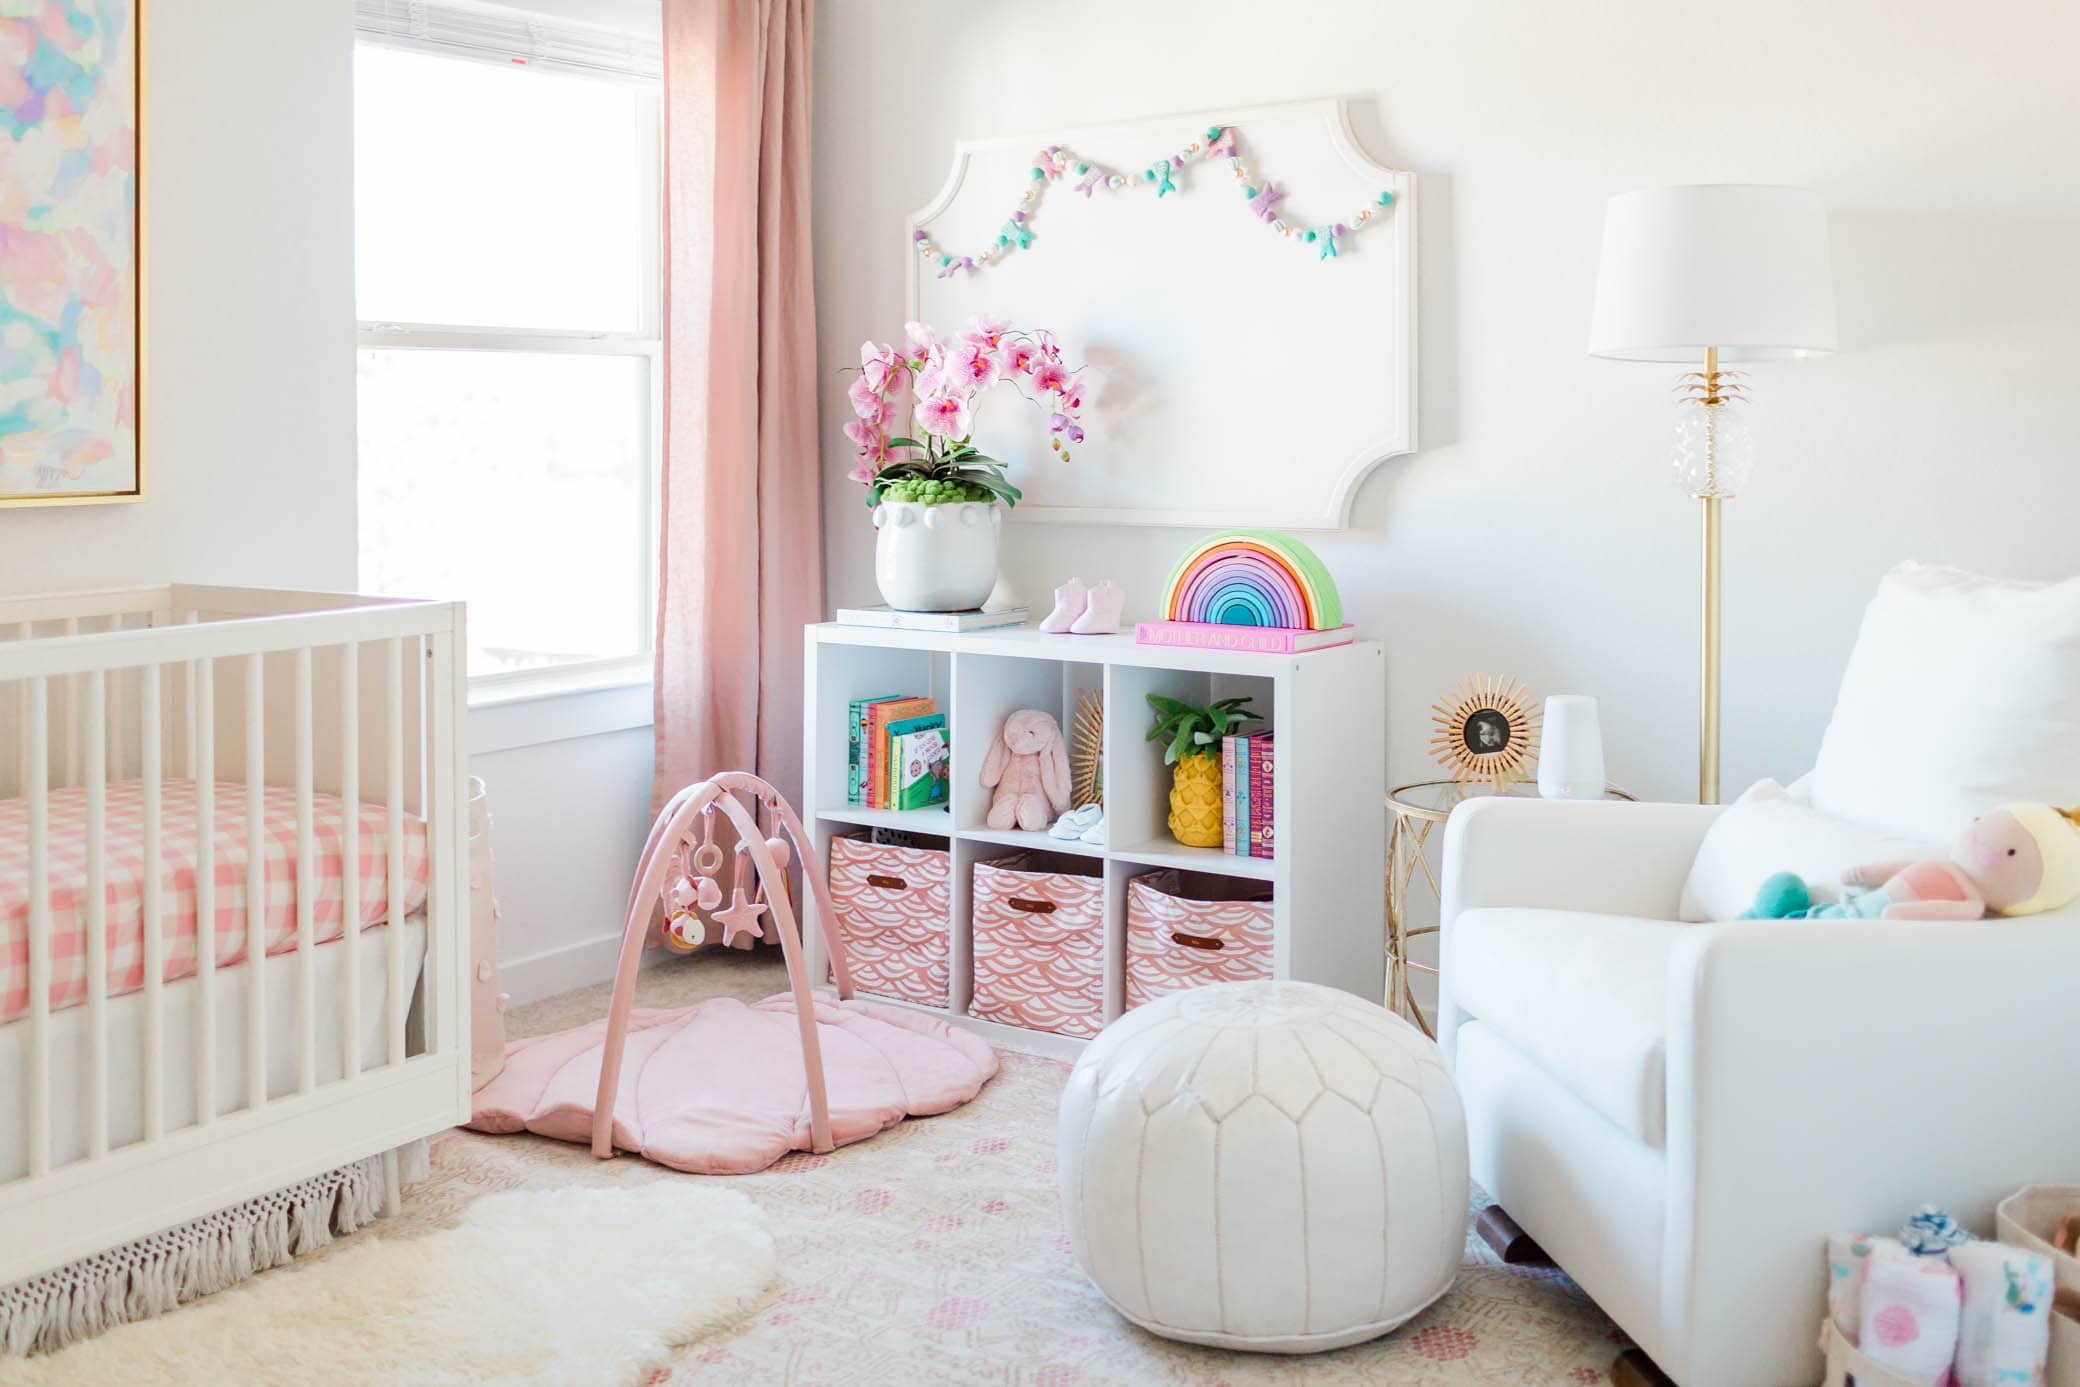 The Top 10 Baby Safe Paint Products For Your Nursery